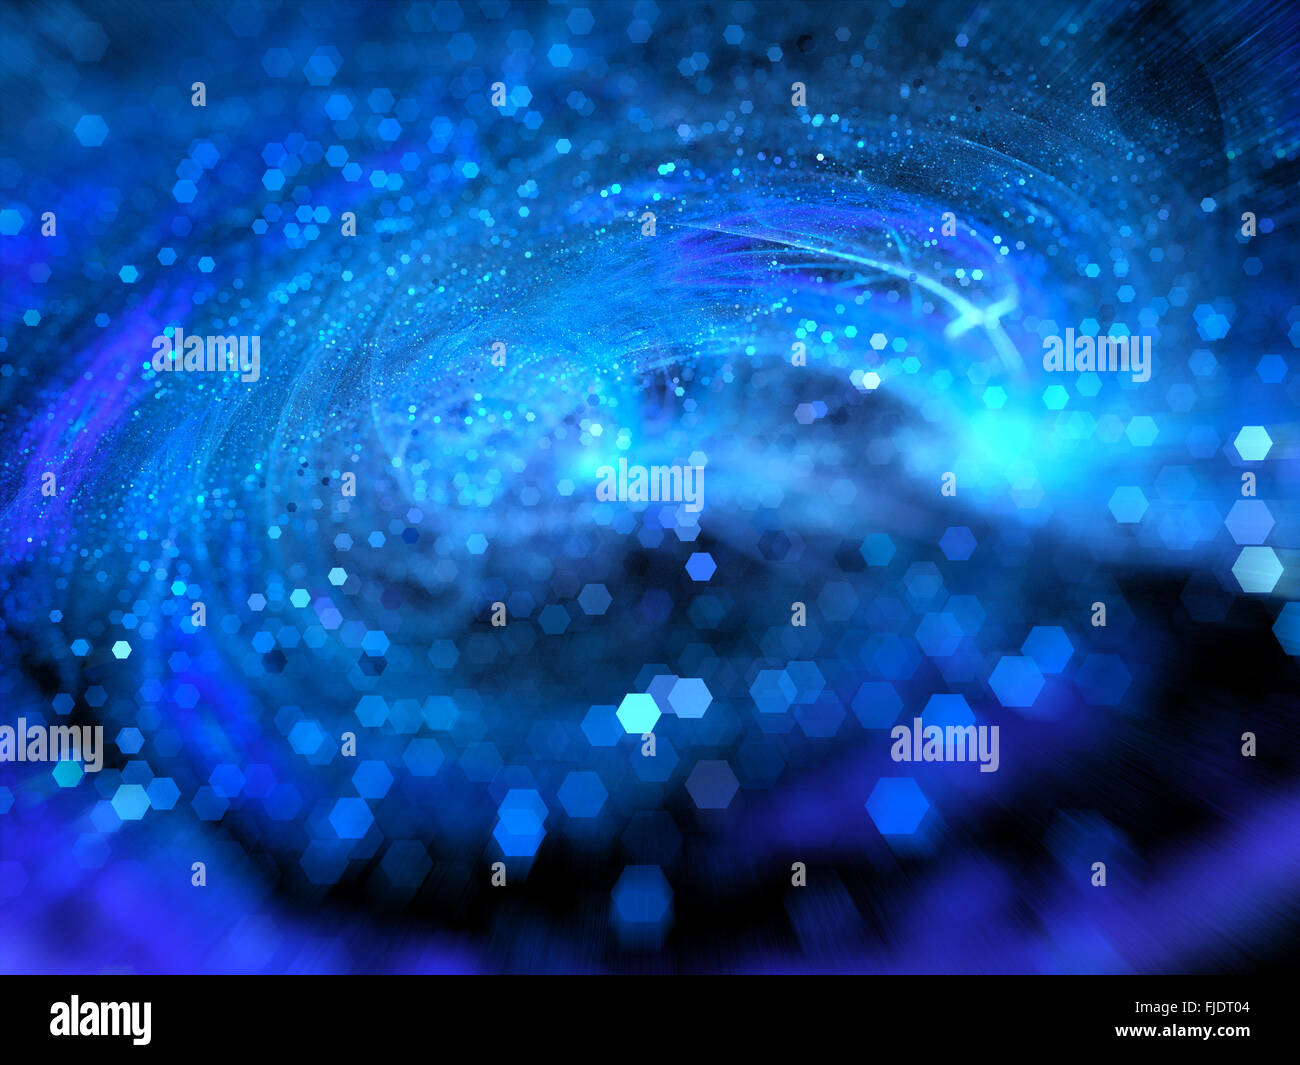 Blue glowing space background with particles in out of focus bokeh, computer generated abstract background Stock Photo